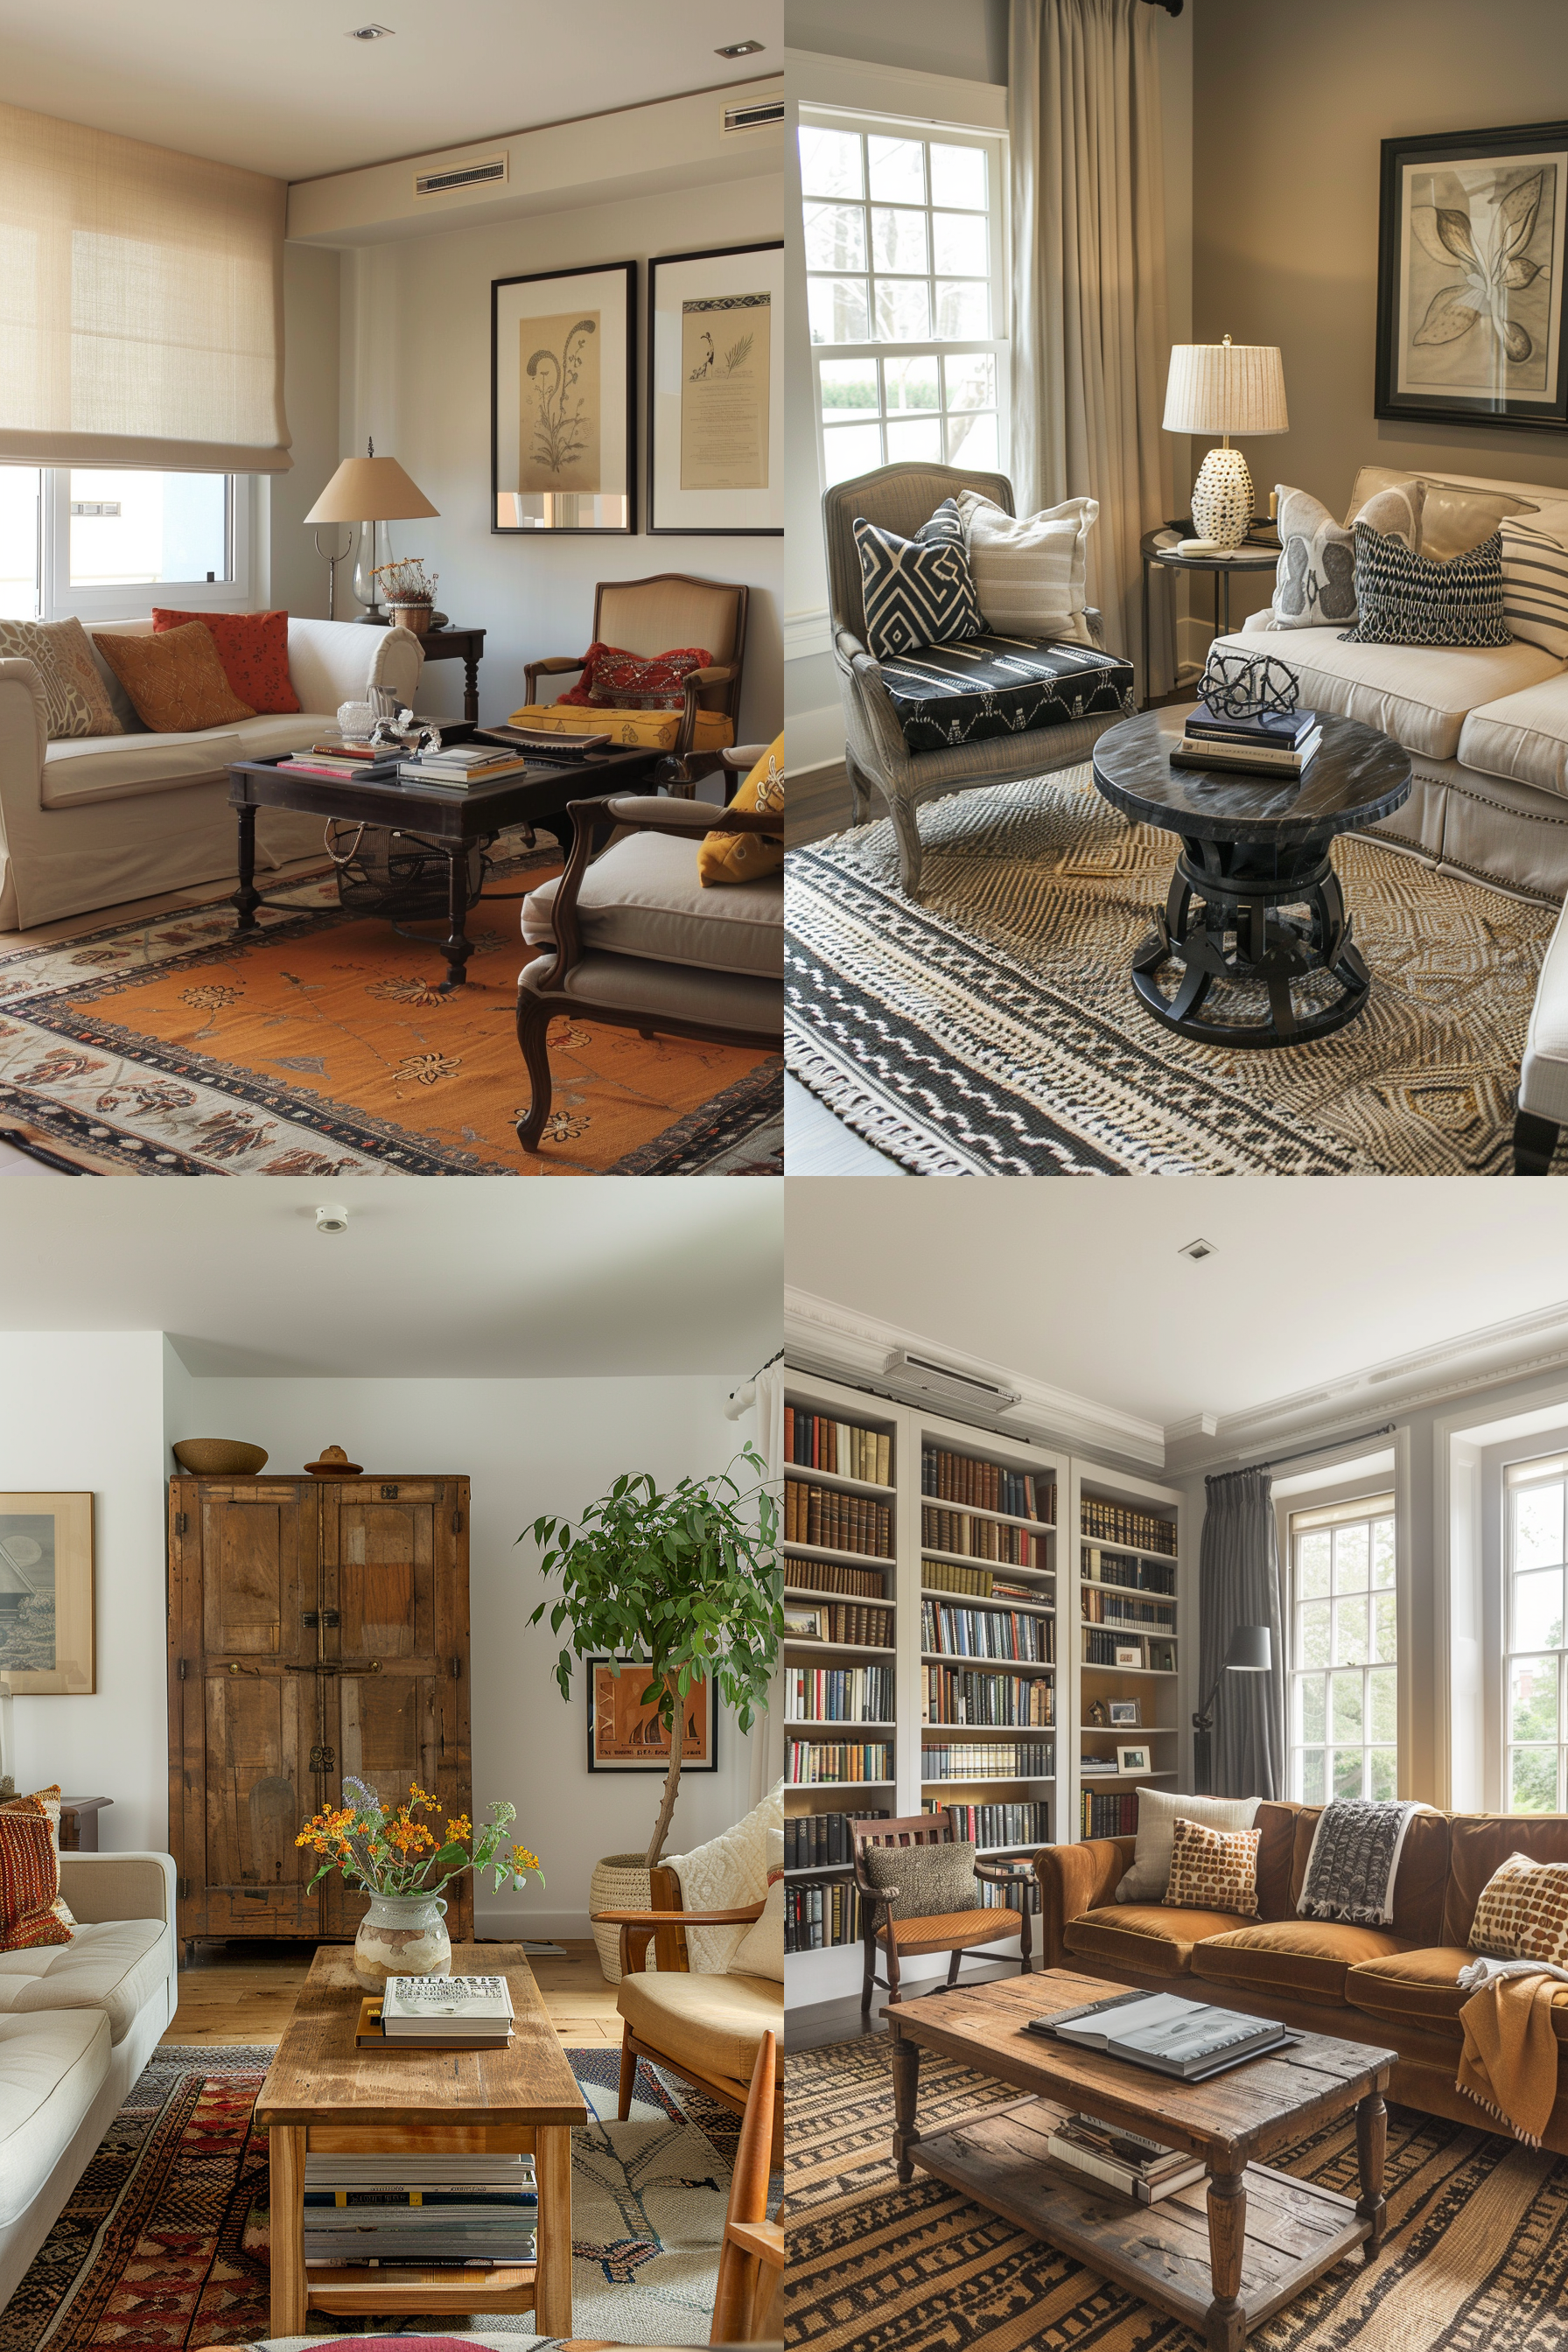 Four images of elegant living rooms with stylish furniture, area rugs, and bookshelves, showcasing diverse interior designs.